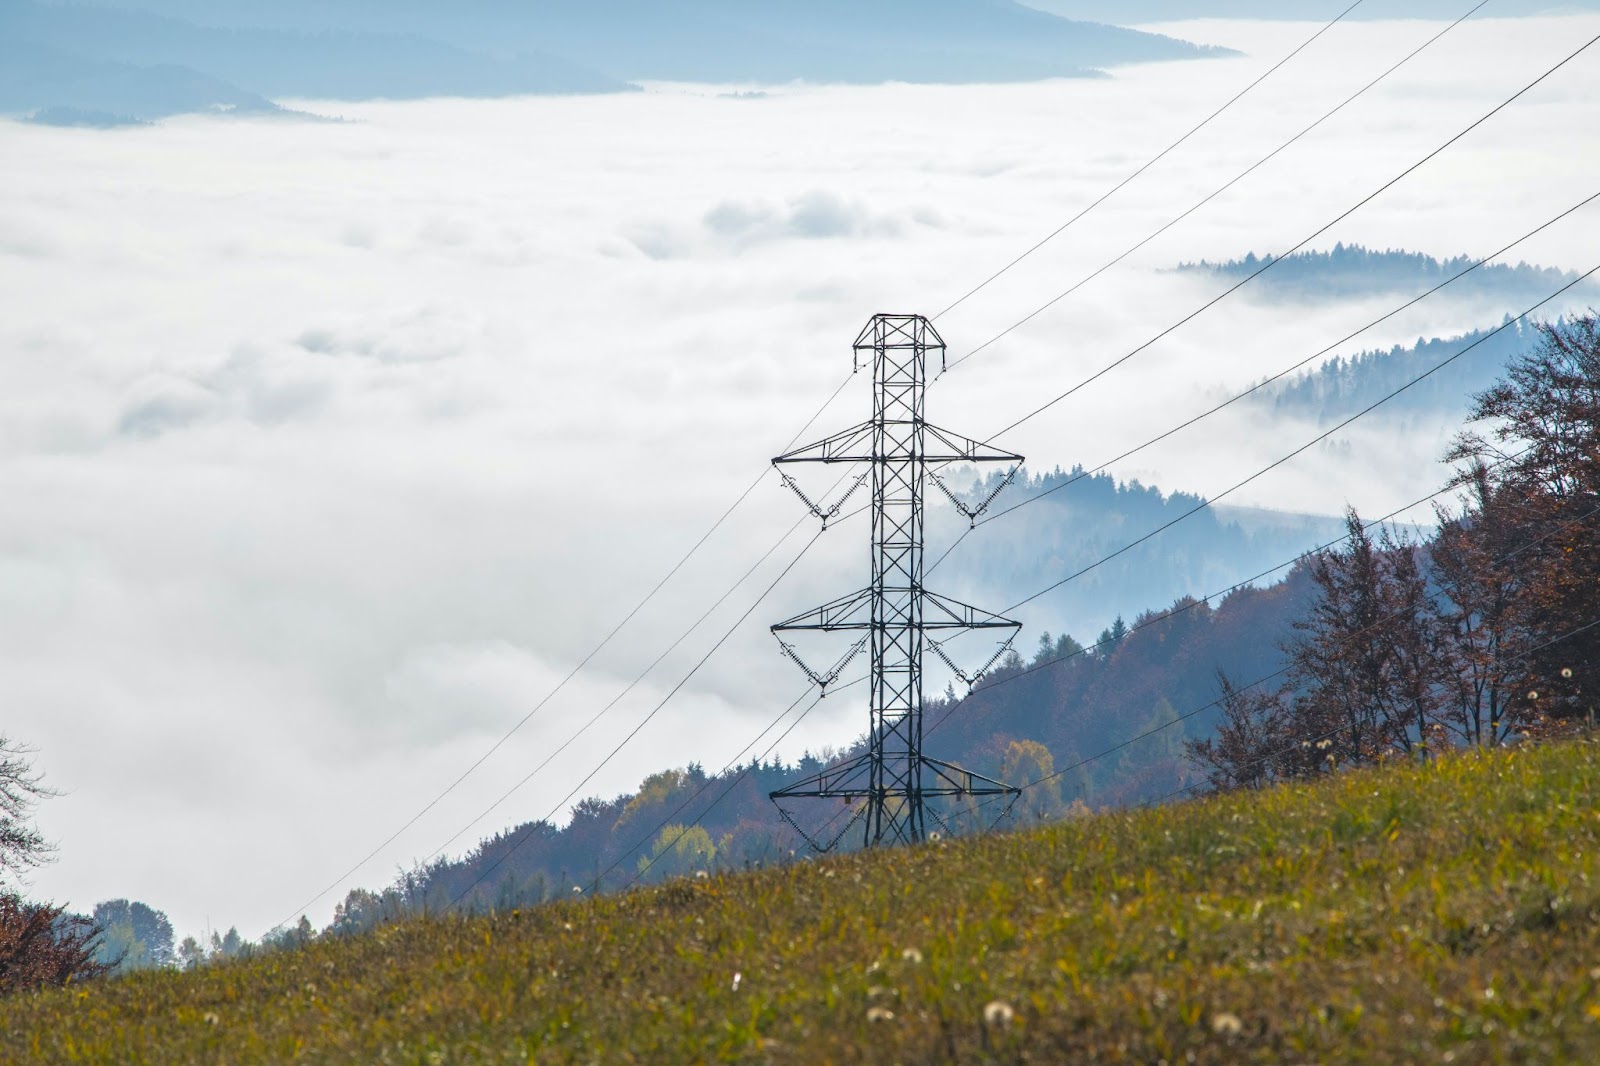 Electricity lines and pylon on a hill